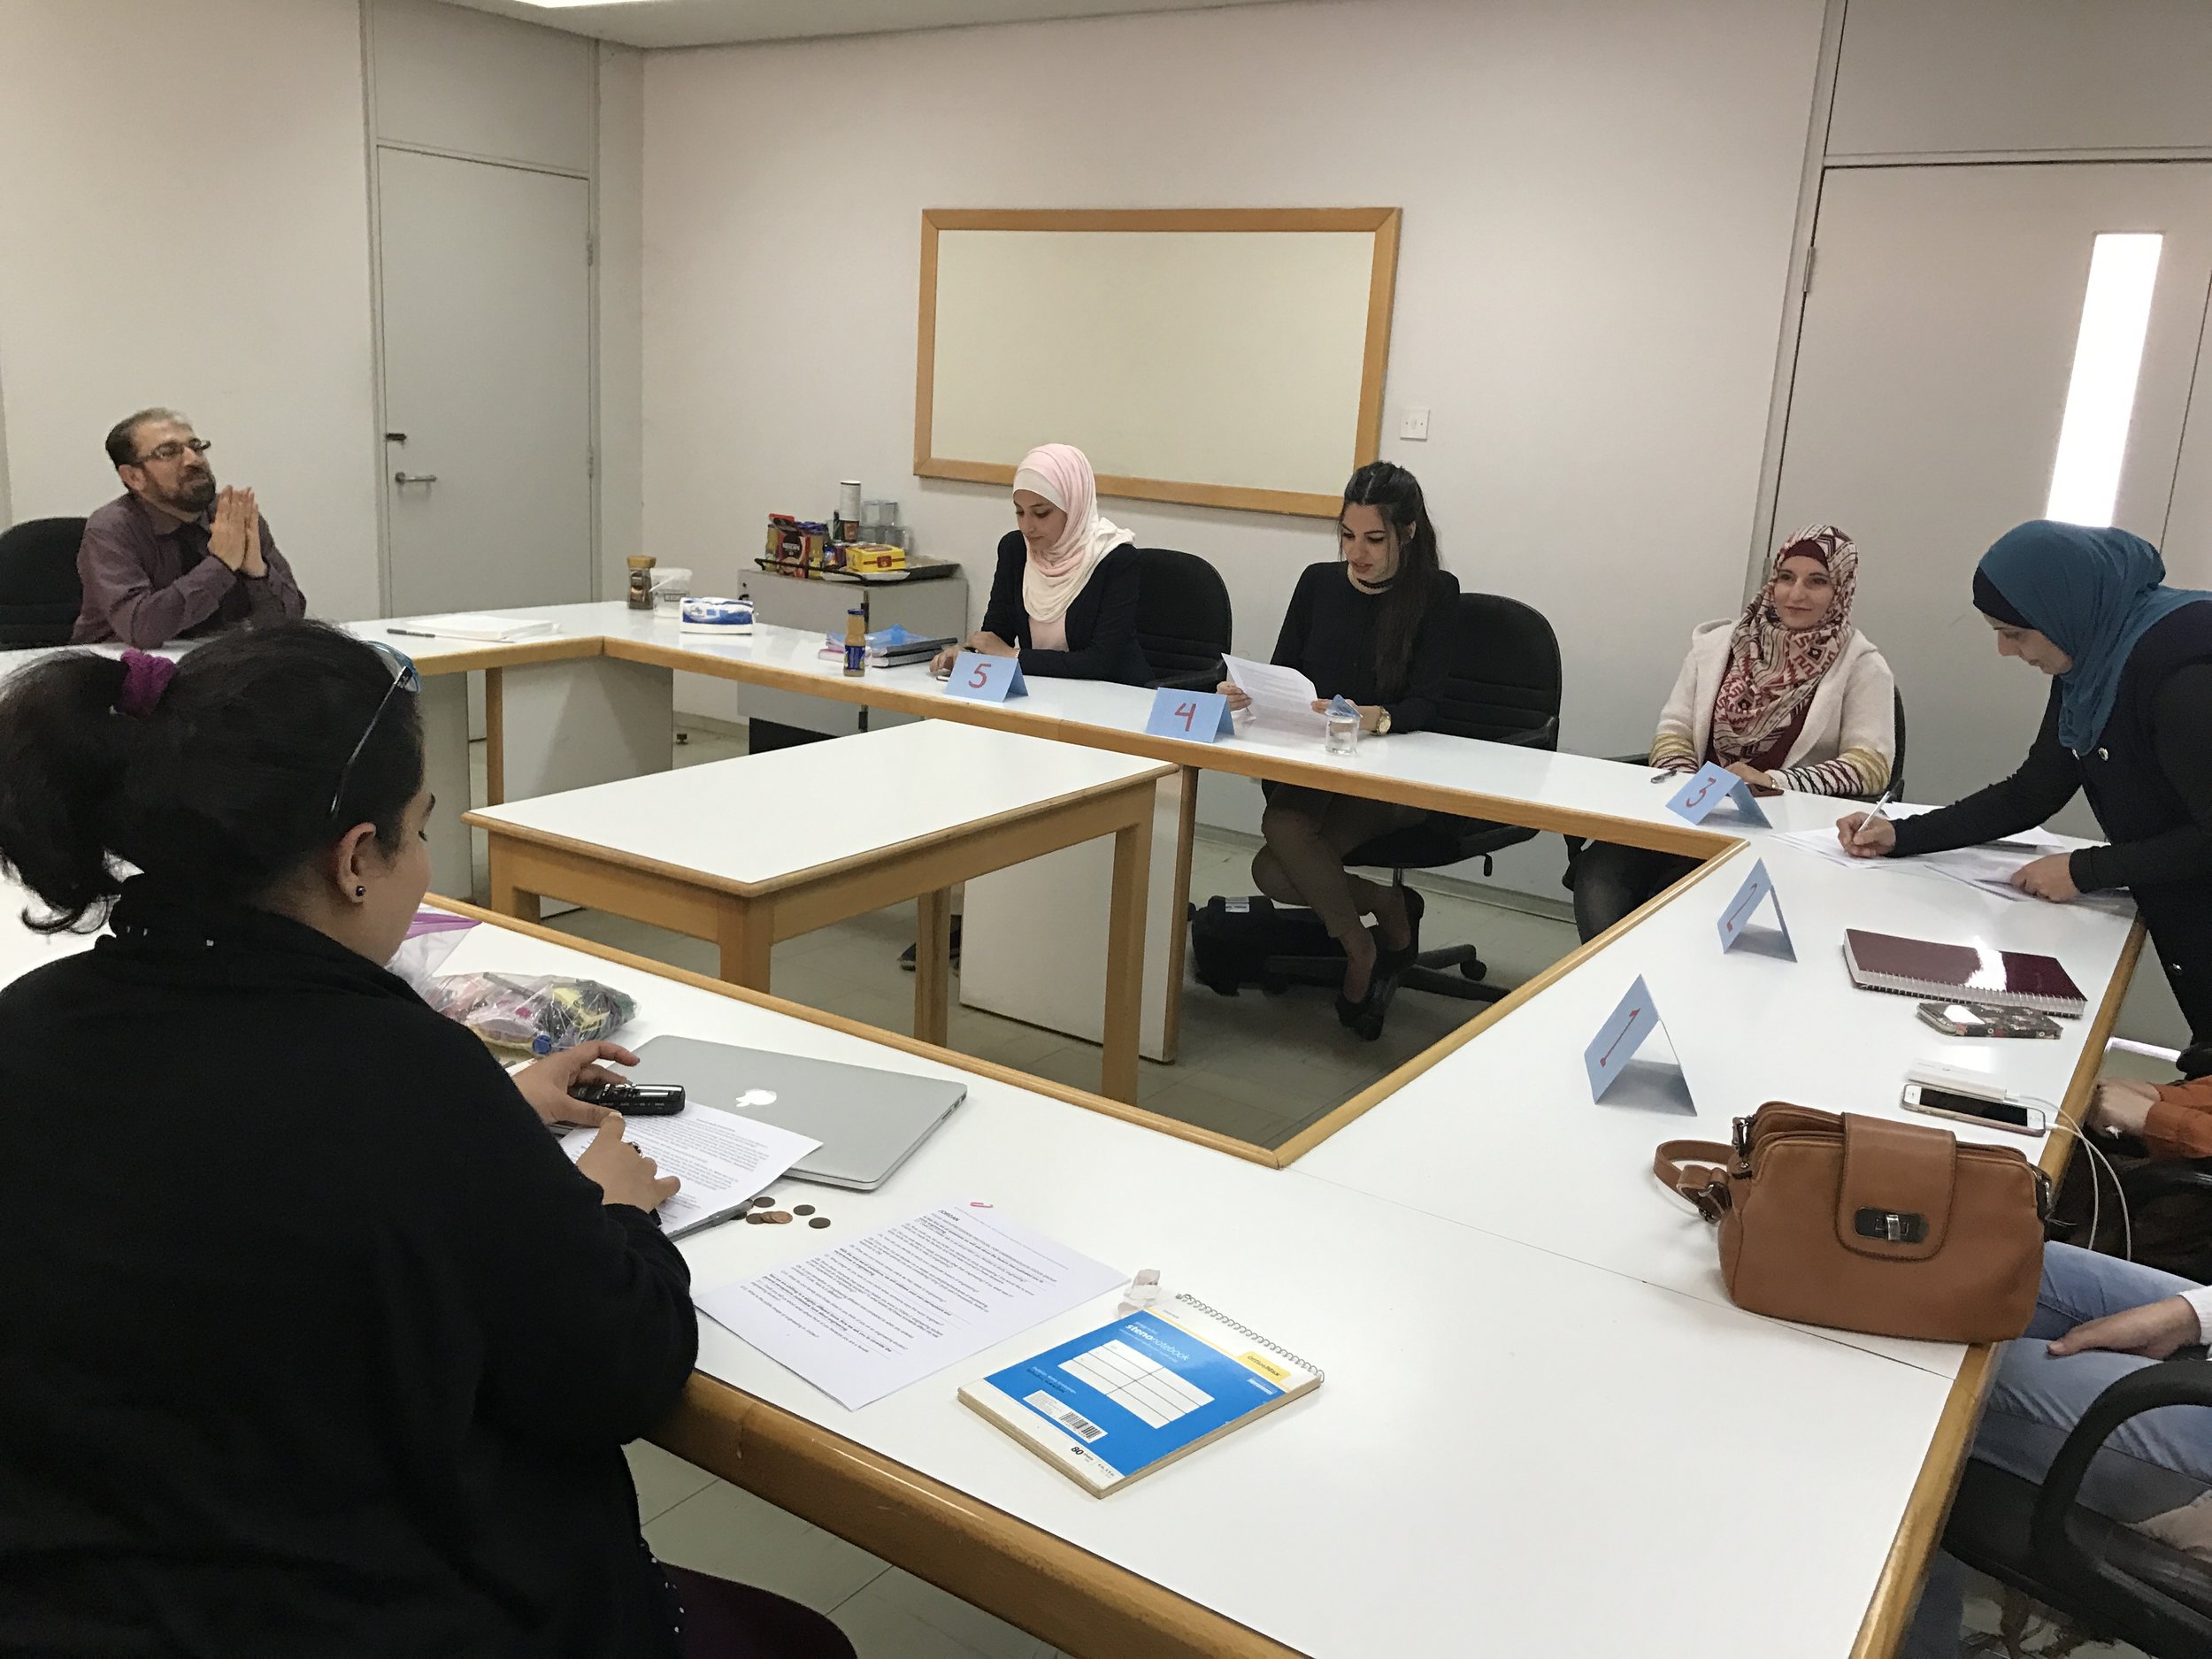  Our first focus group with undergraduate engineering students at Jordan University of Science and Technology (JUST). 